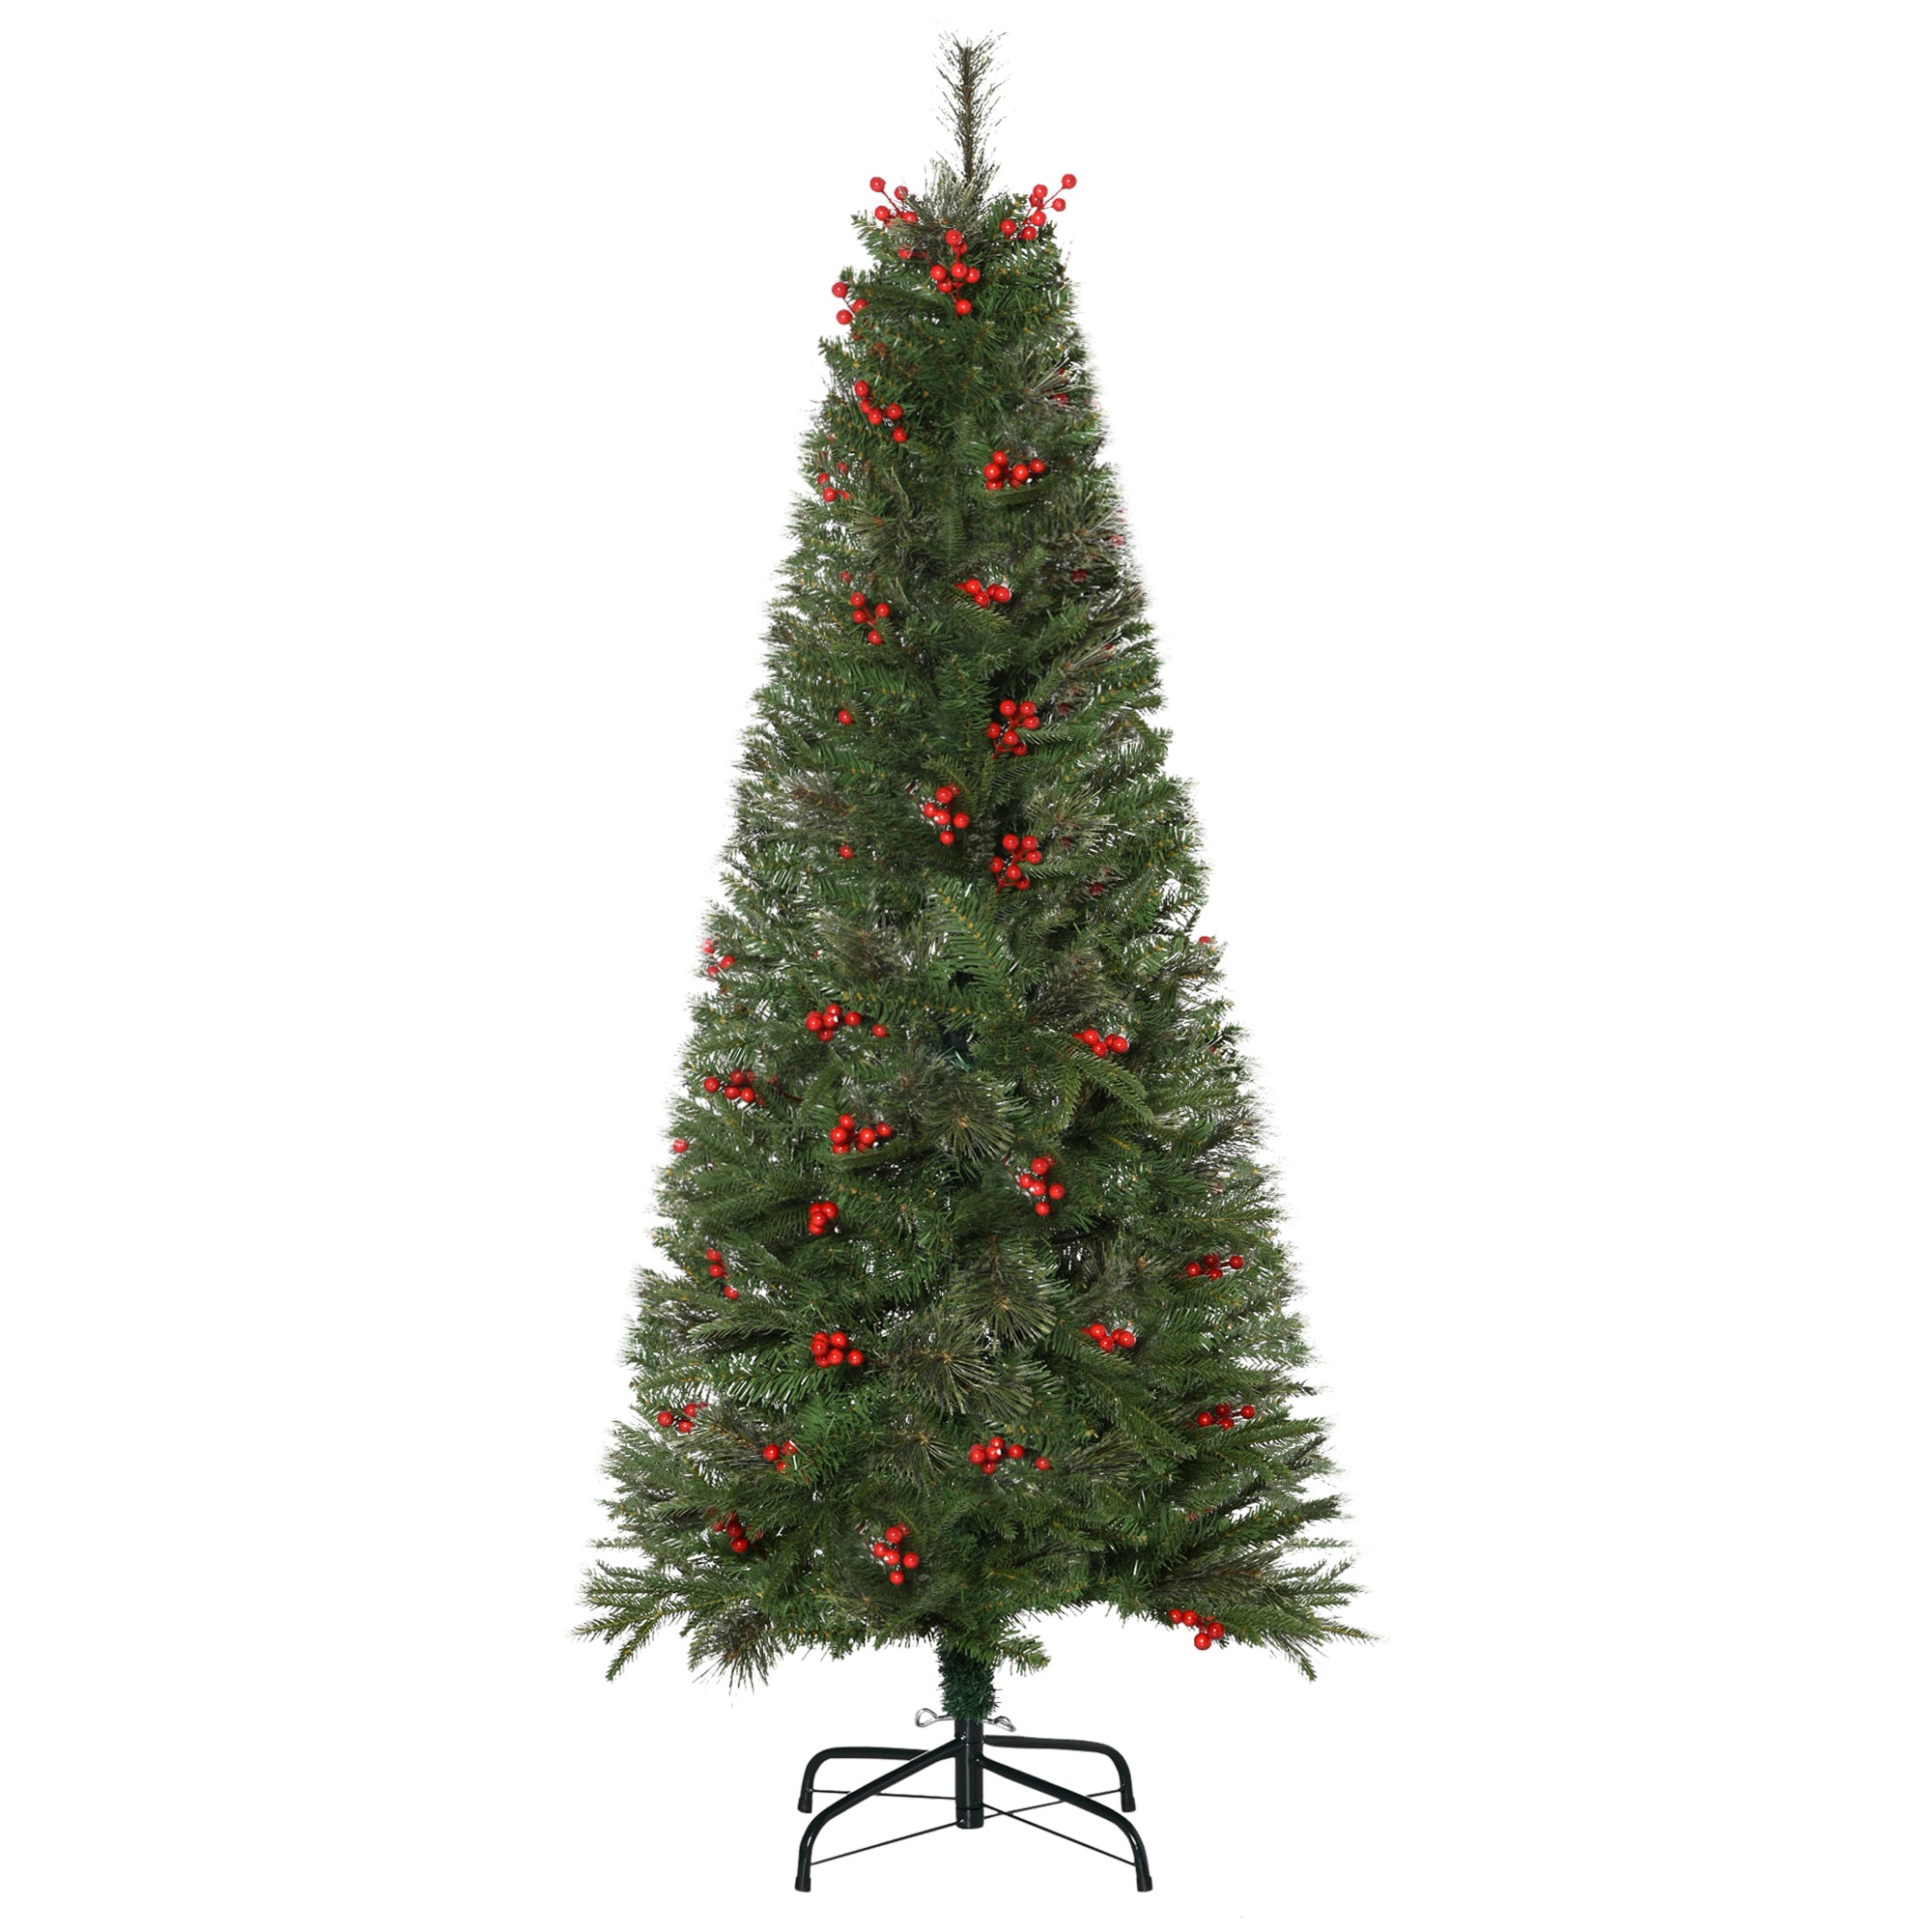 HOMCOM Pencil Artificial Christmas Tree with Realistic Branches, Red Berries, Auto Open, Green